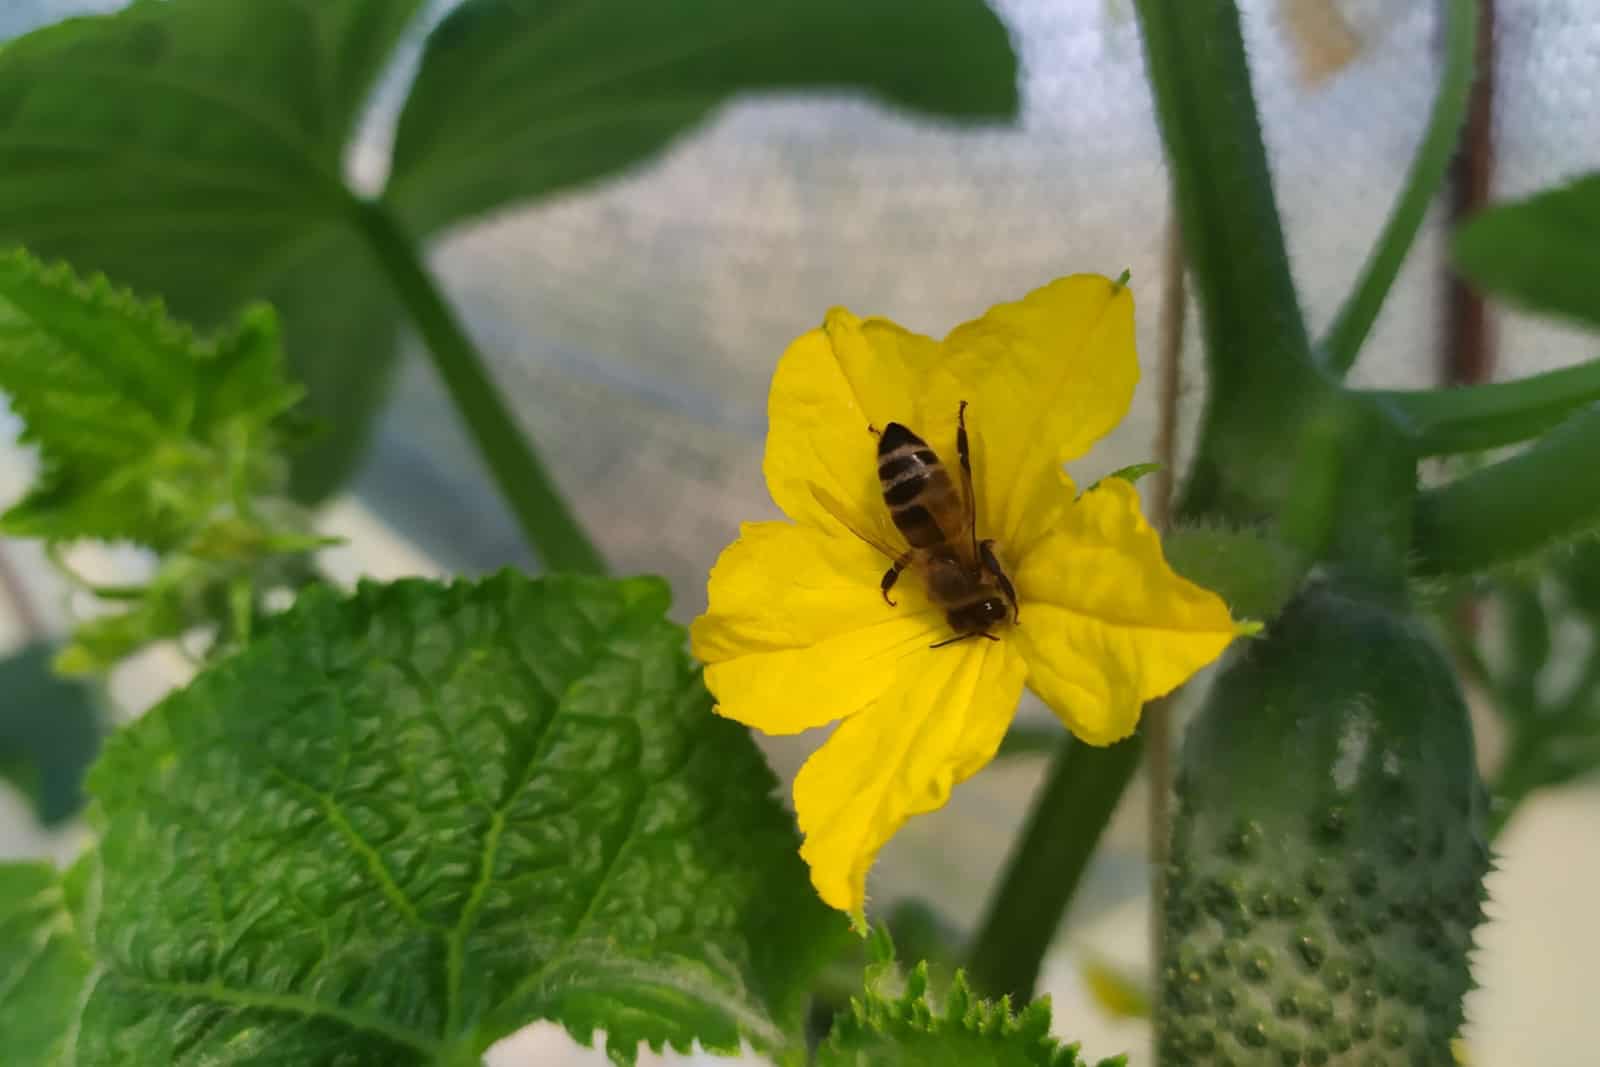 A bee pollinates a yellow cucumber flower in a greenhouse